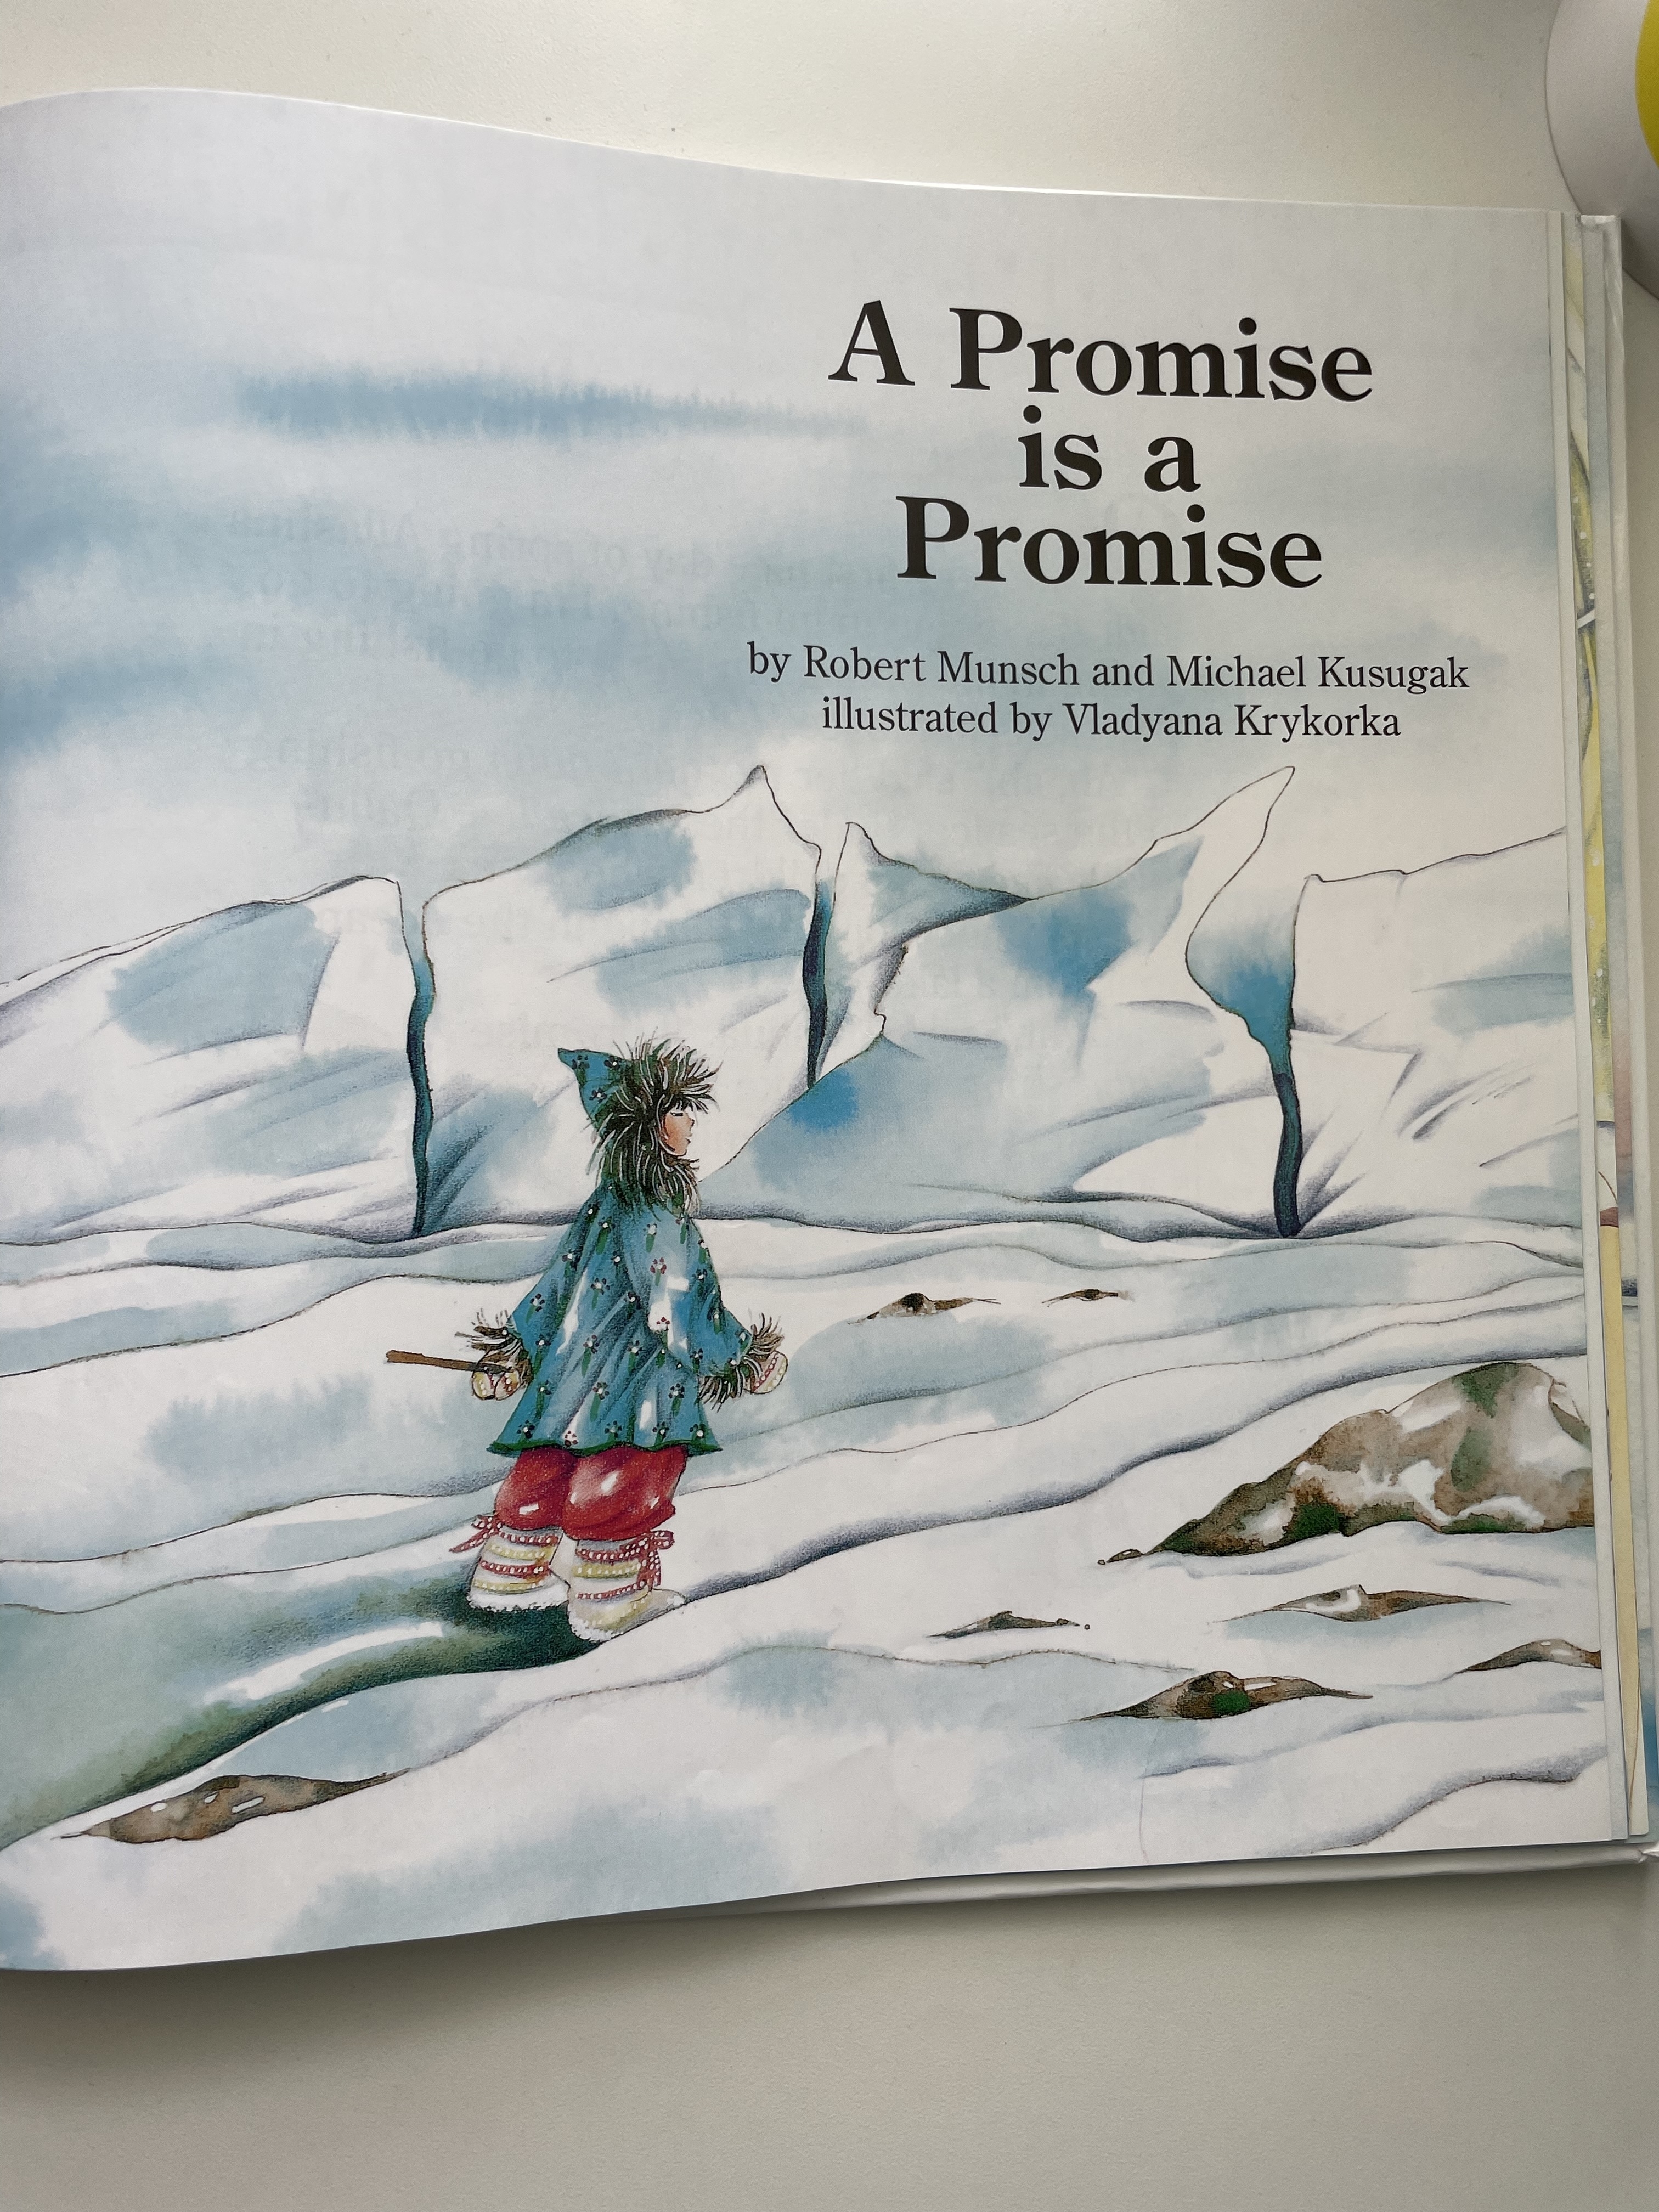 Book page titled &quot;A Promise is a Promise&quot; showing an illustration of a child in winter clothing against a snowy backdrop